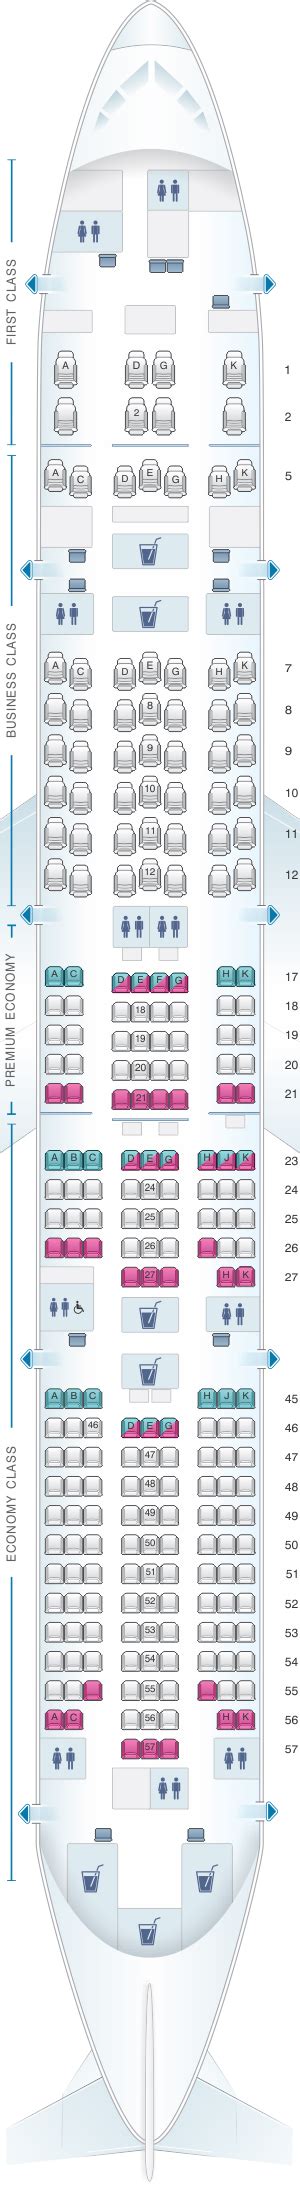 japan airlines 777-300er seat map